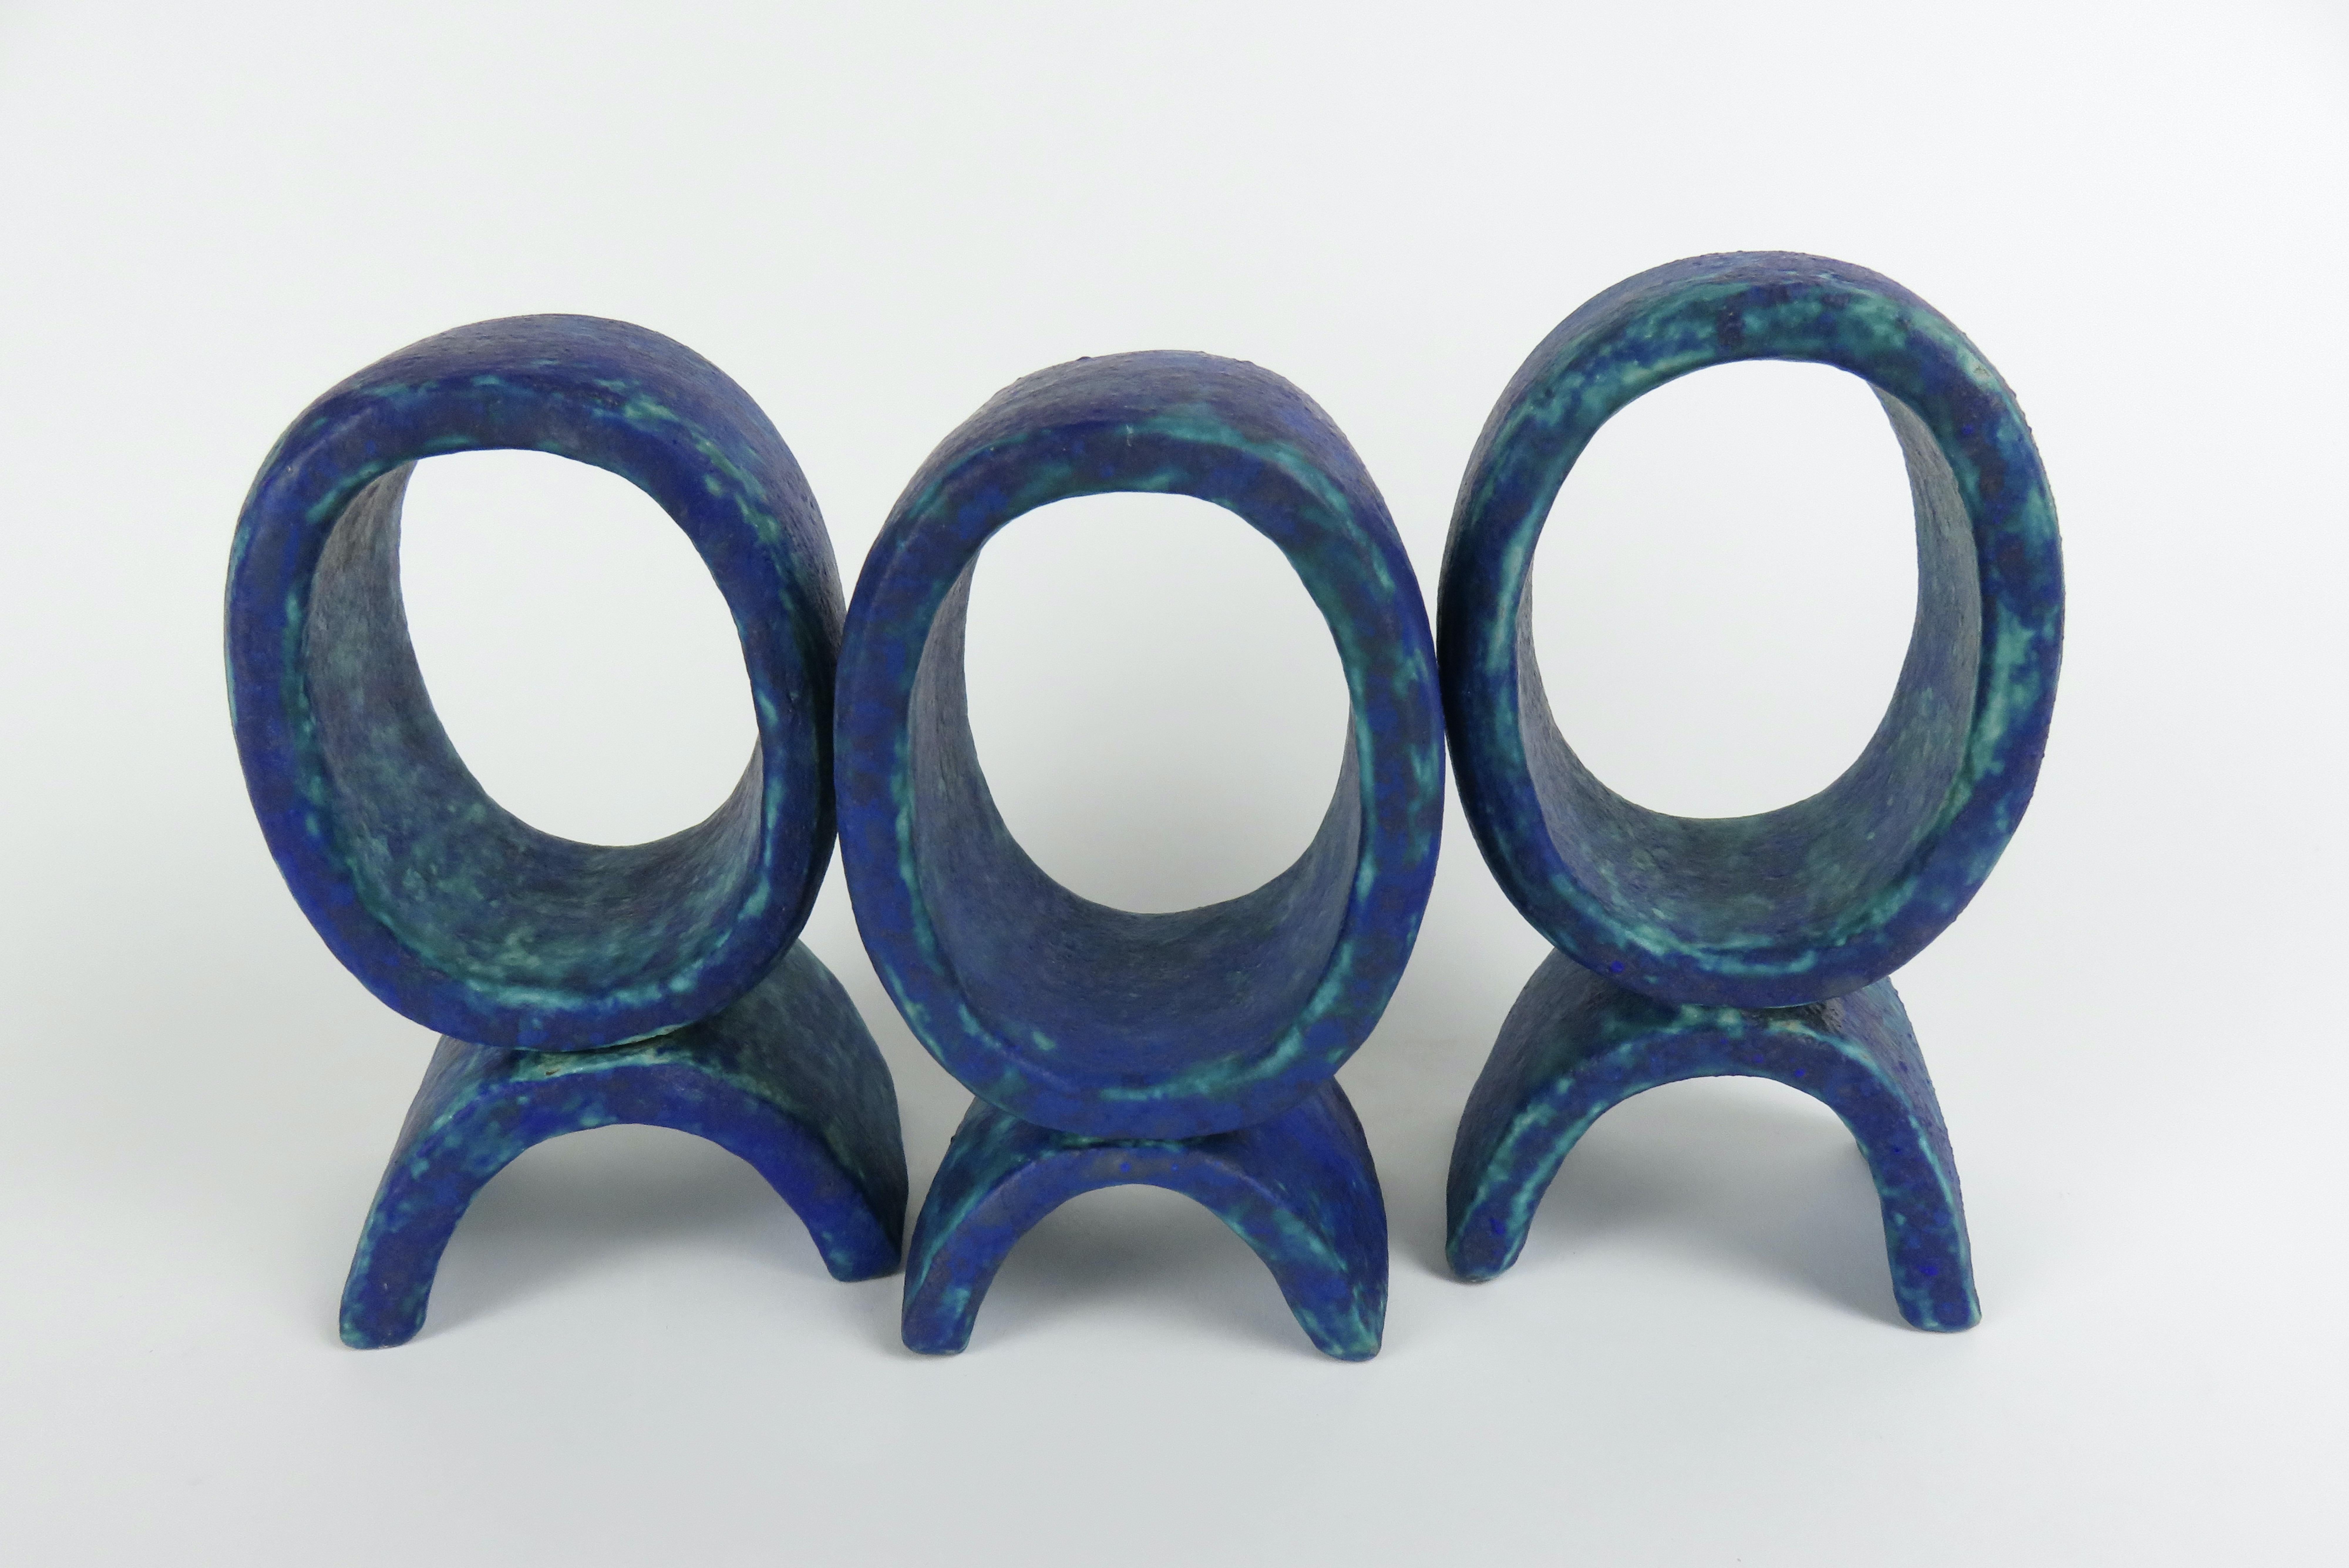 Hand-Crafted Mottled Turquoise and Deep Blue, 3 Ceramic Totems, Single Rings on Curved Legs For Sale